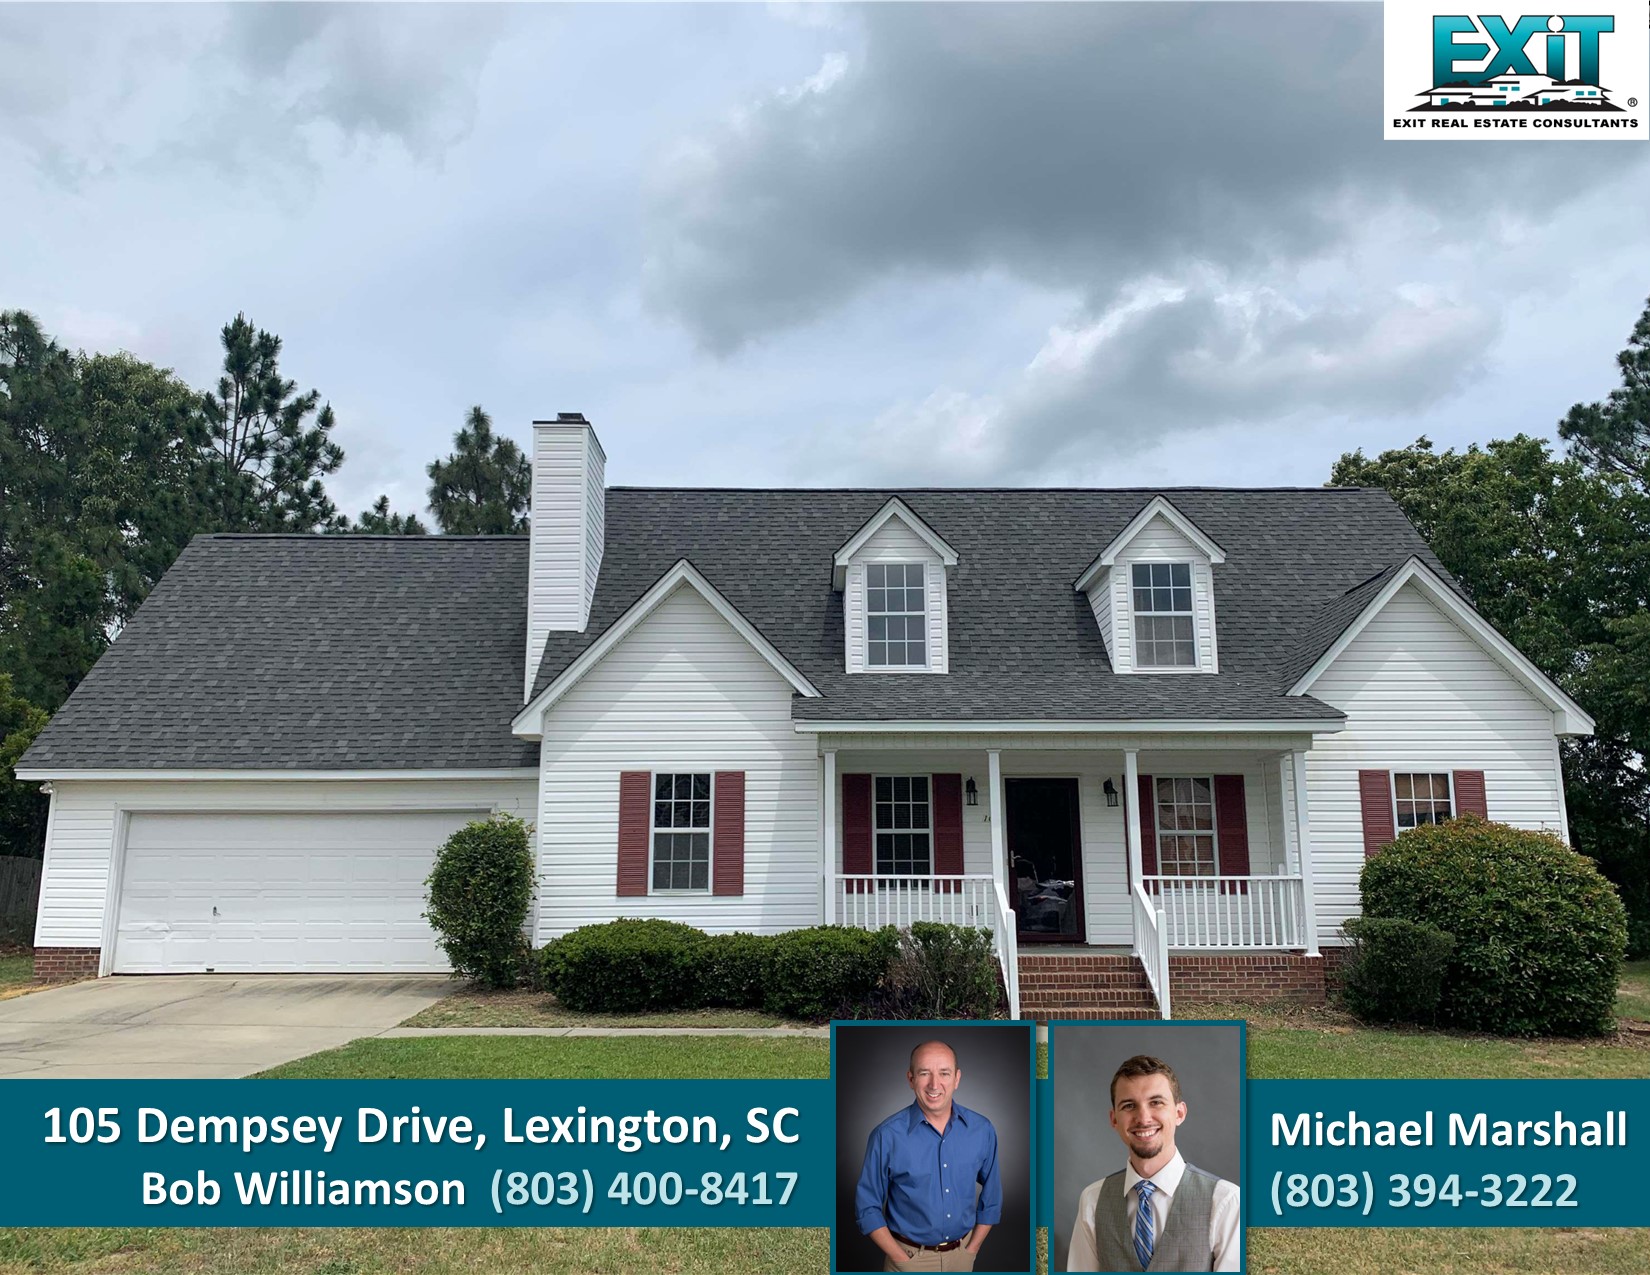 Just listed in Wingate Farms